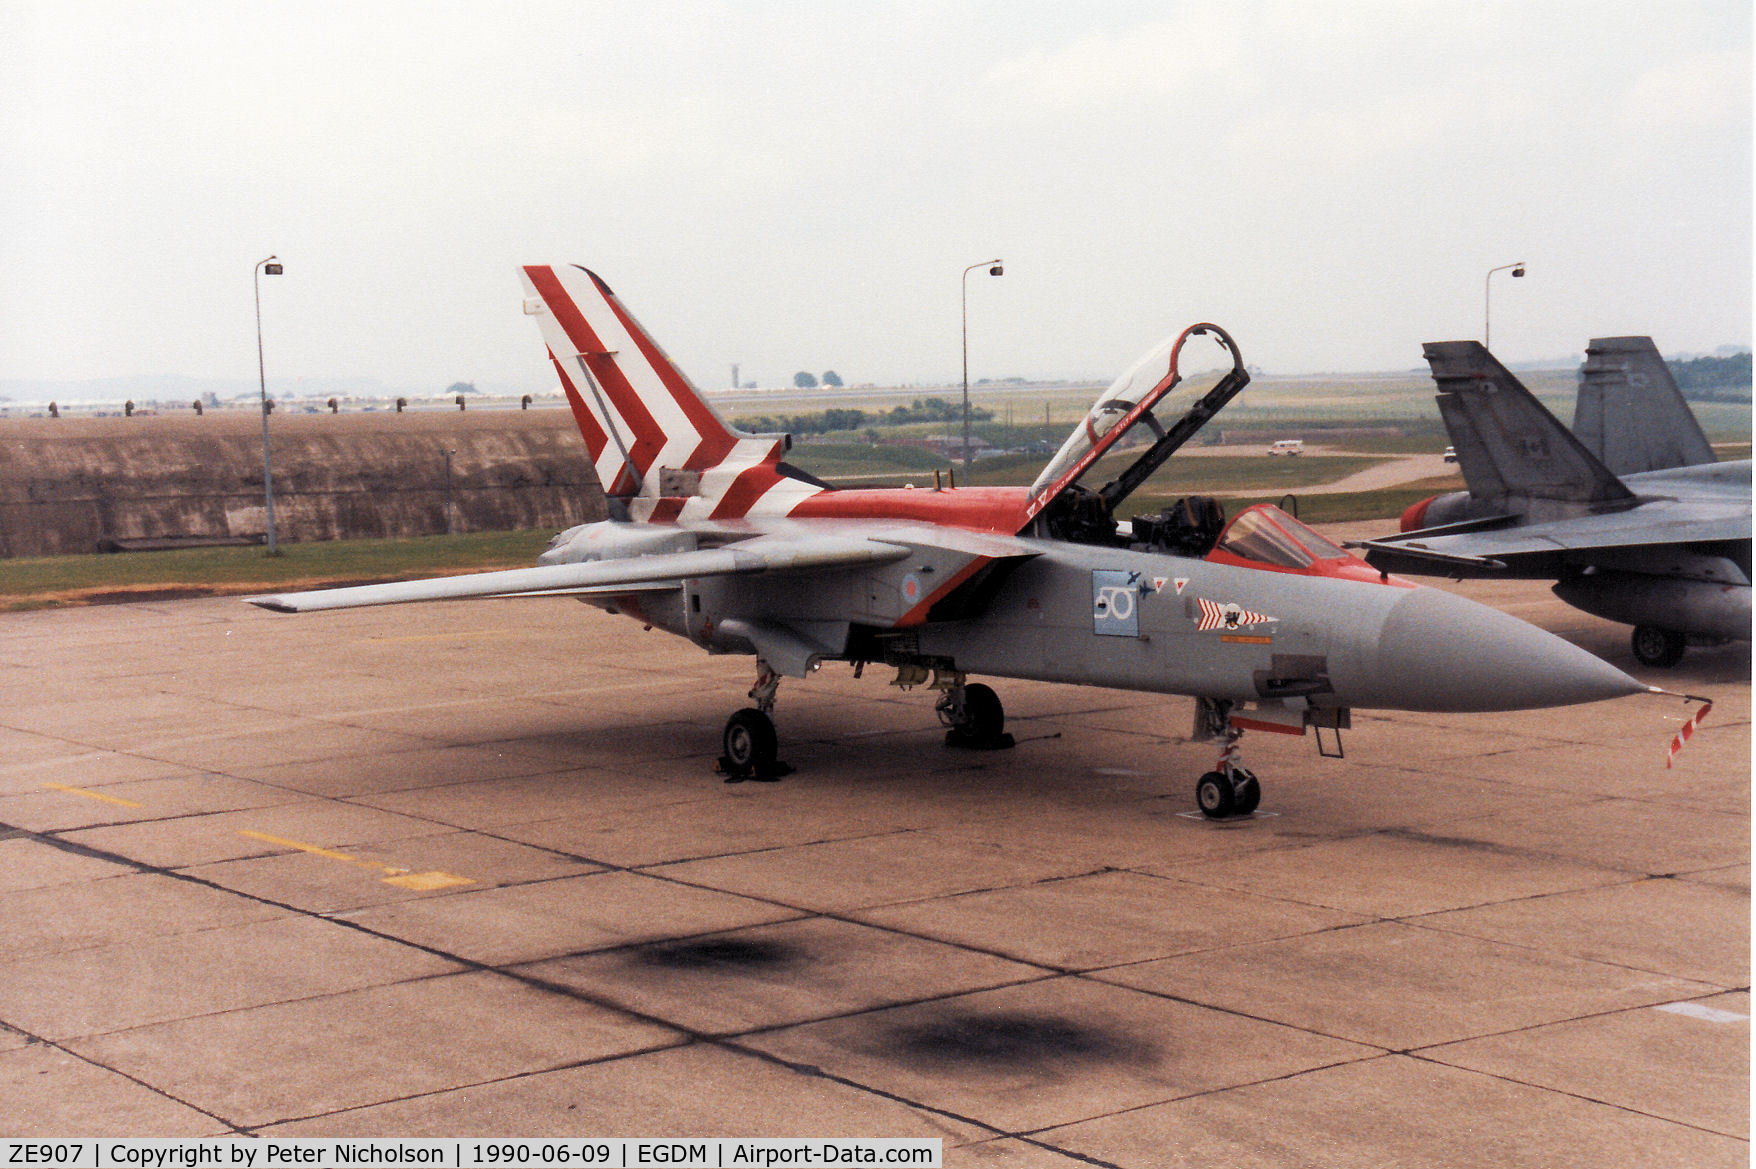 ZE907, 1989 Panavia Tornado F.3 C/N AS098/765/2126, Tornado F.3, callsign Tornado 1, of 229 Operational Conversion Unit at RAF Coningsby on the flight-line at the 1990 Boscombe Down Battle of Britain 50th Anniversary Airshow.